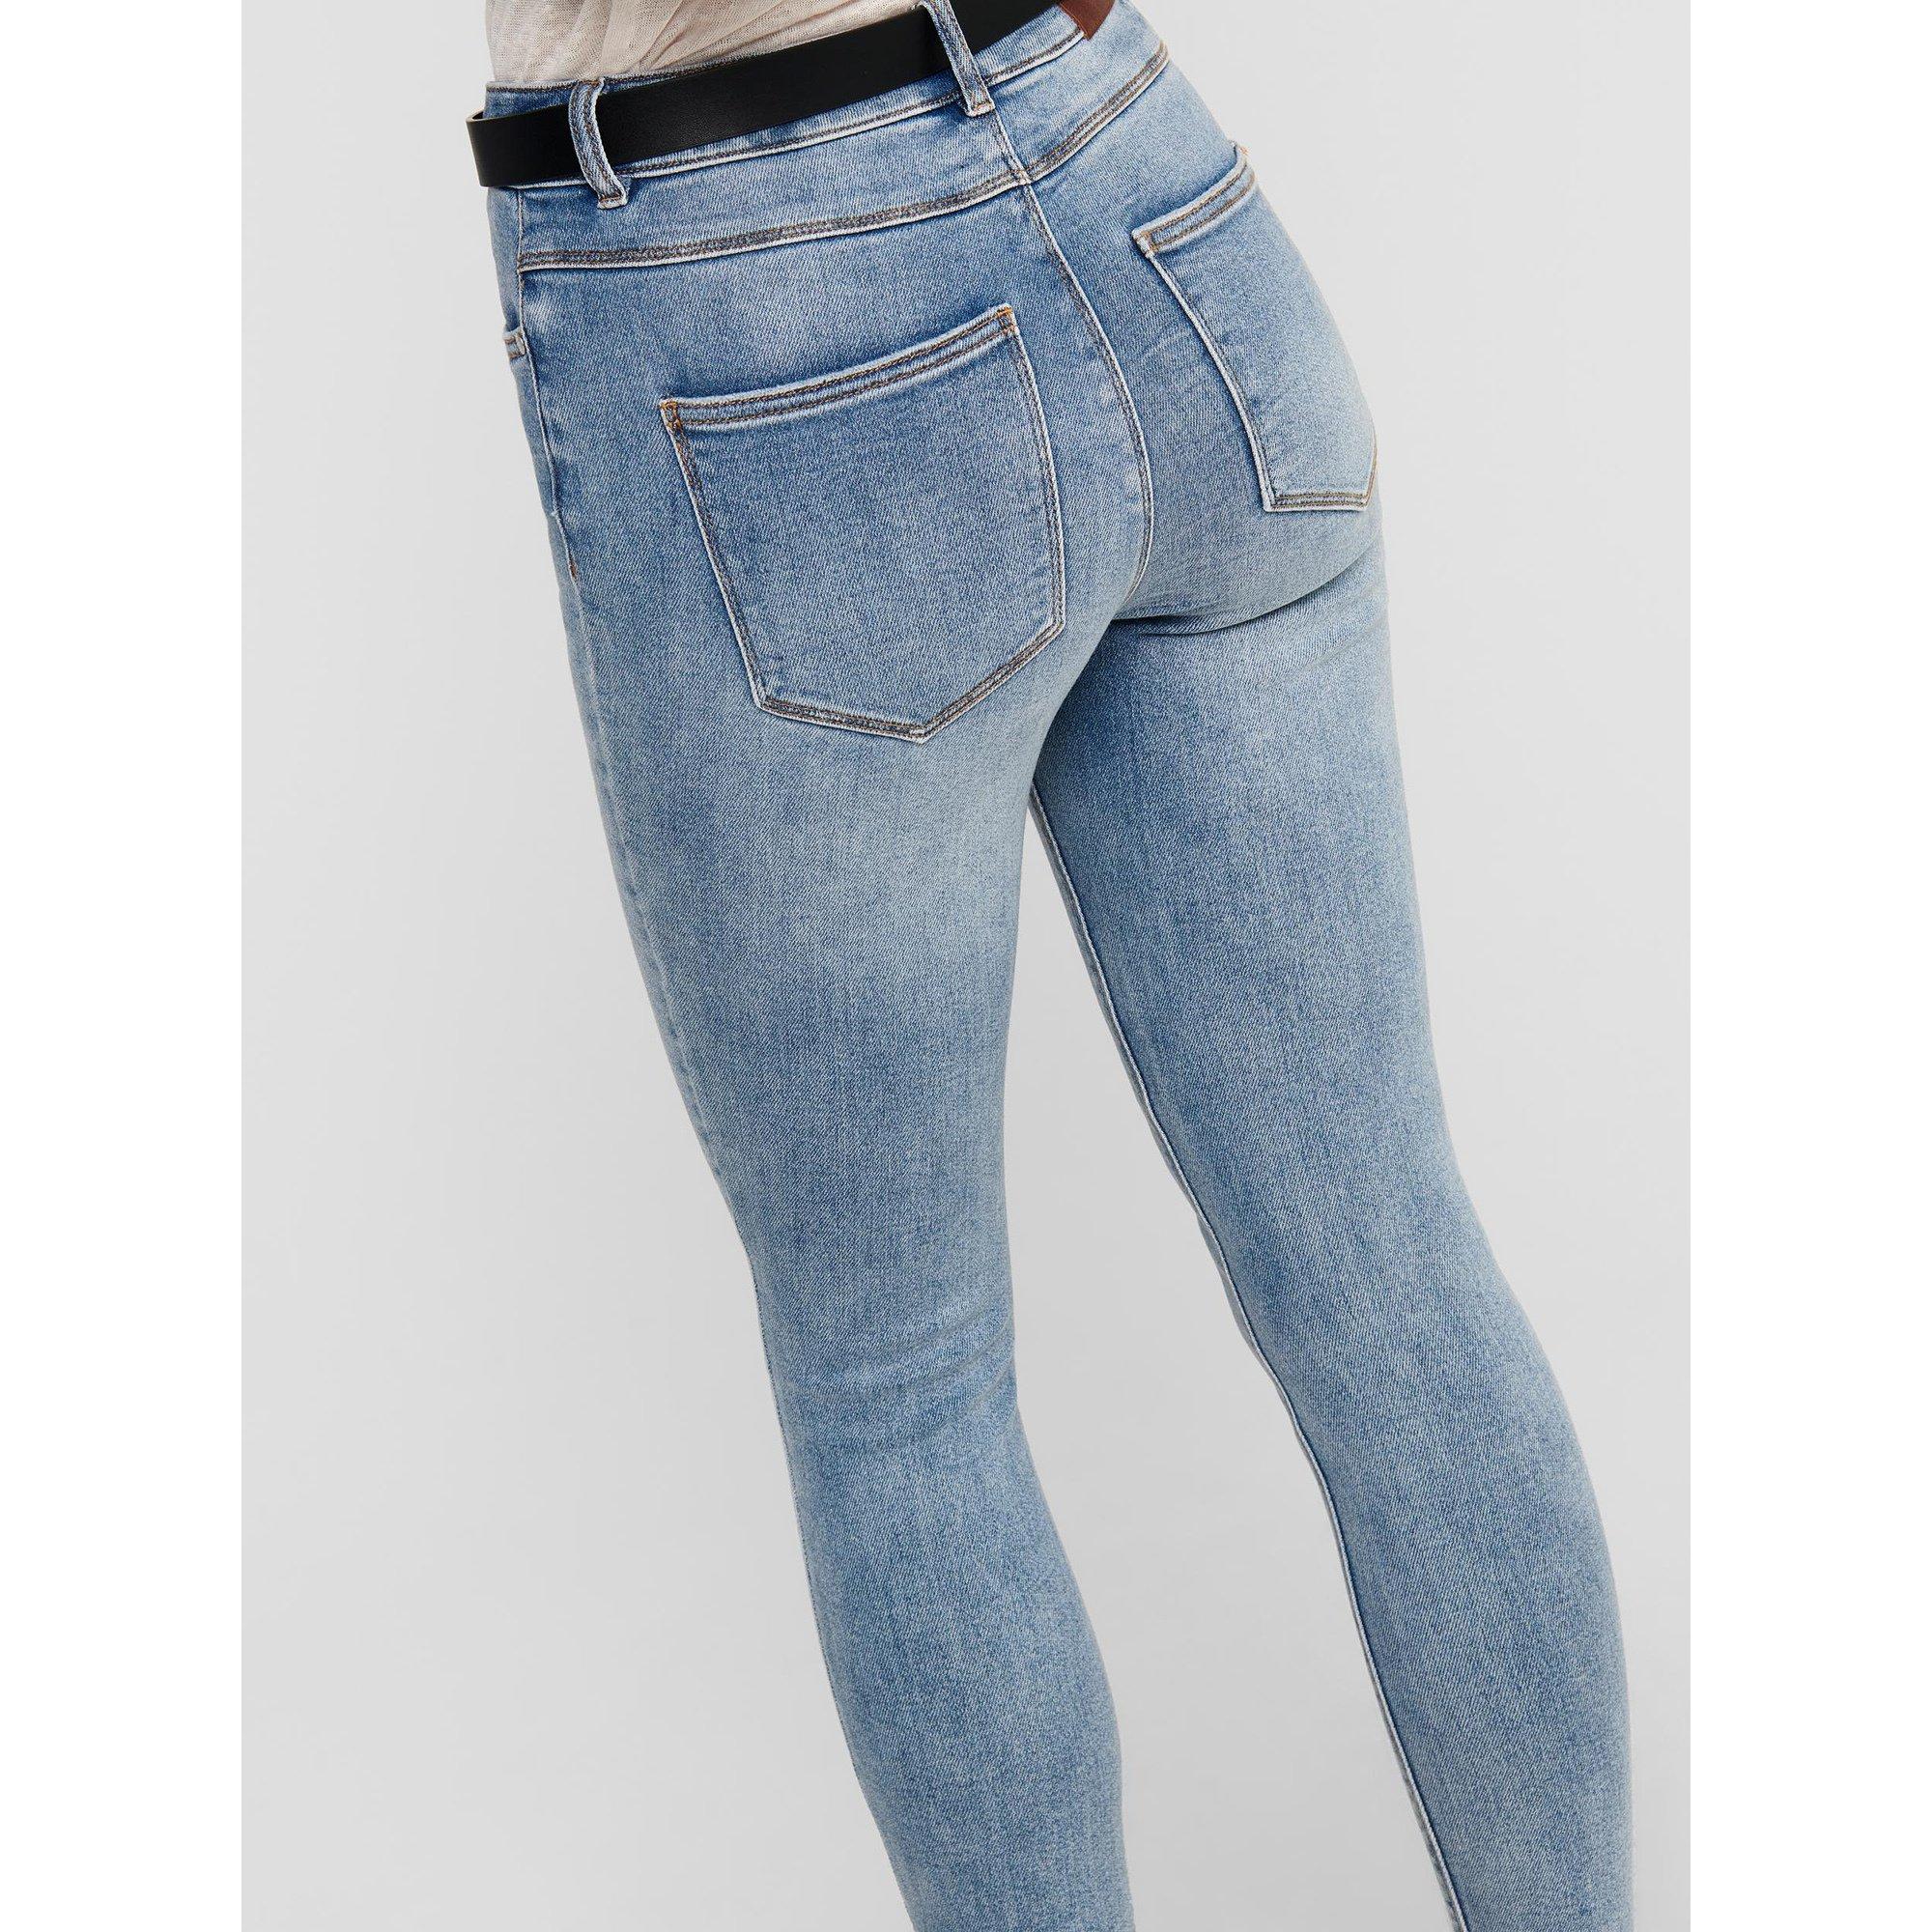 ONLY  15173010 JEANS NOOS 